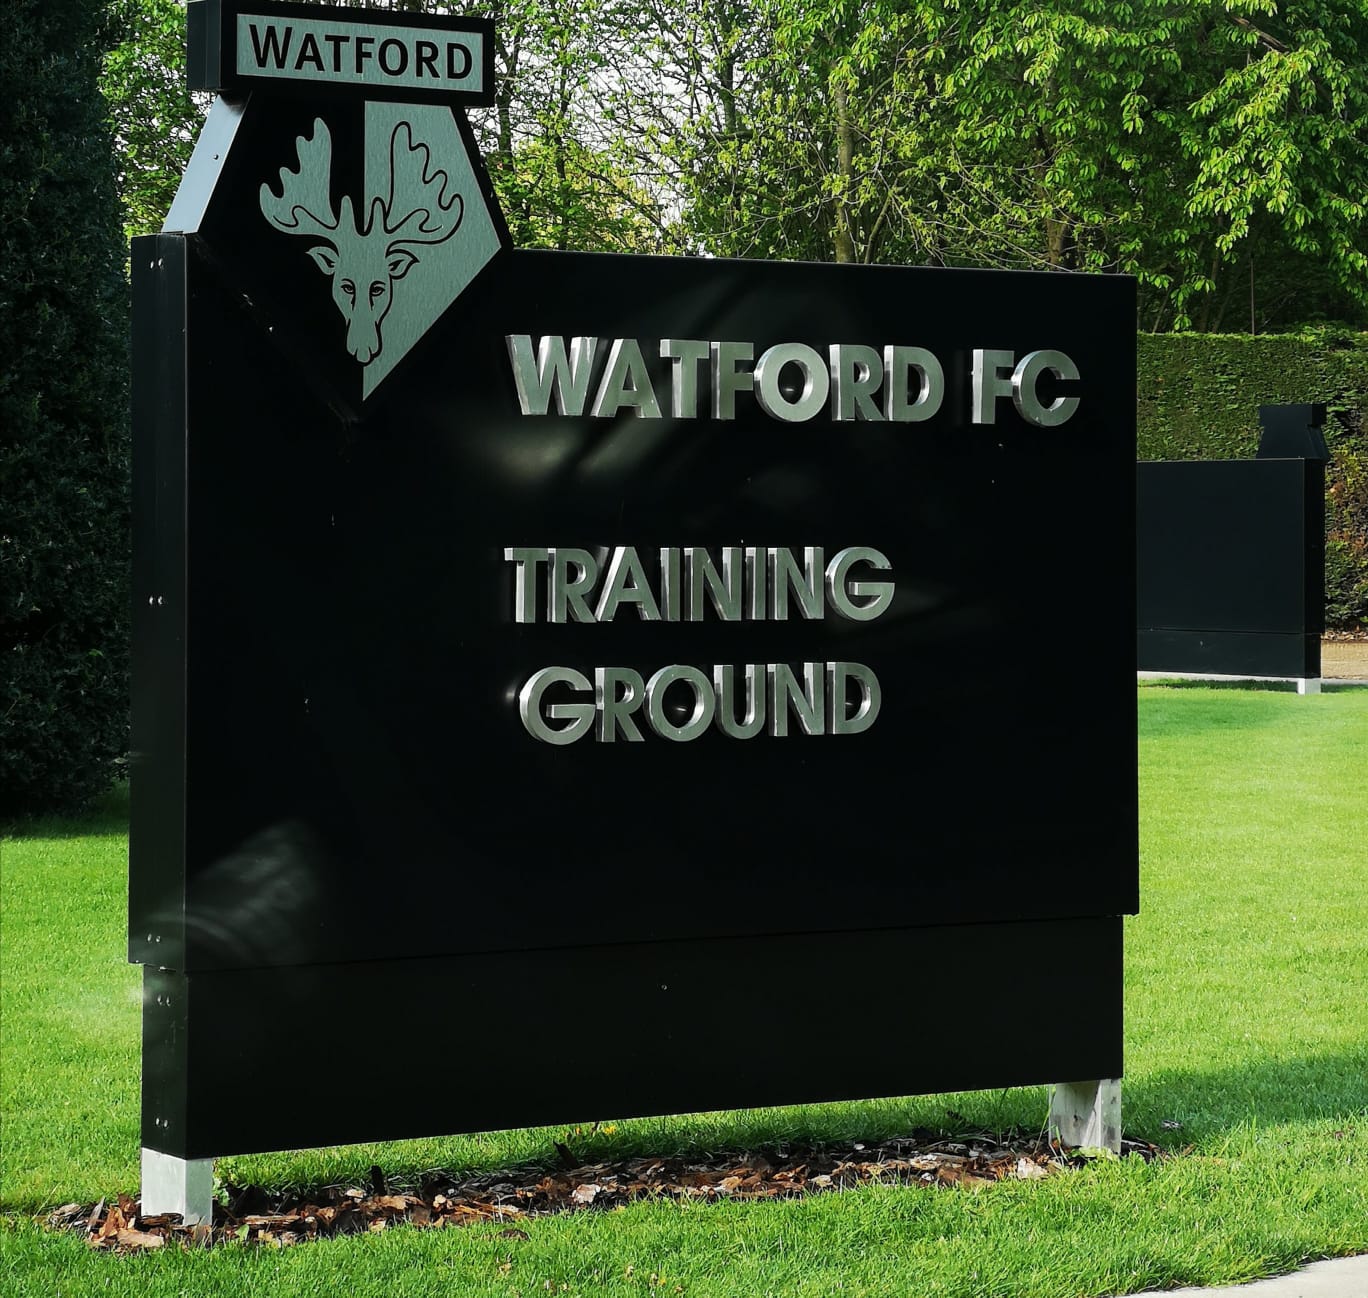 Coronavirus: Two more Watford players isolating after contact